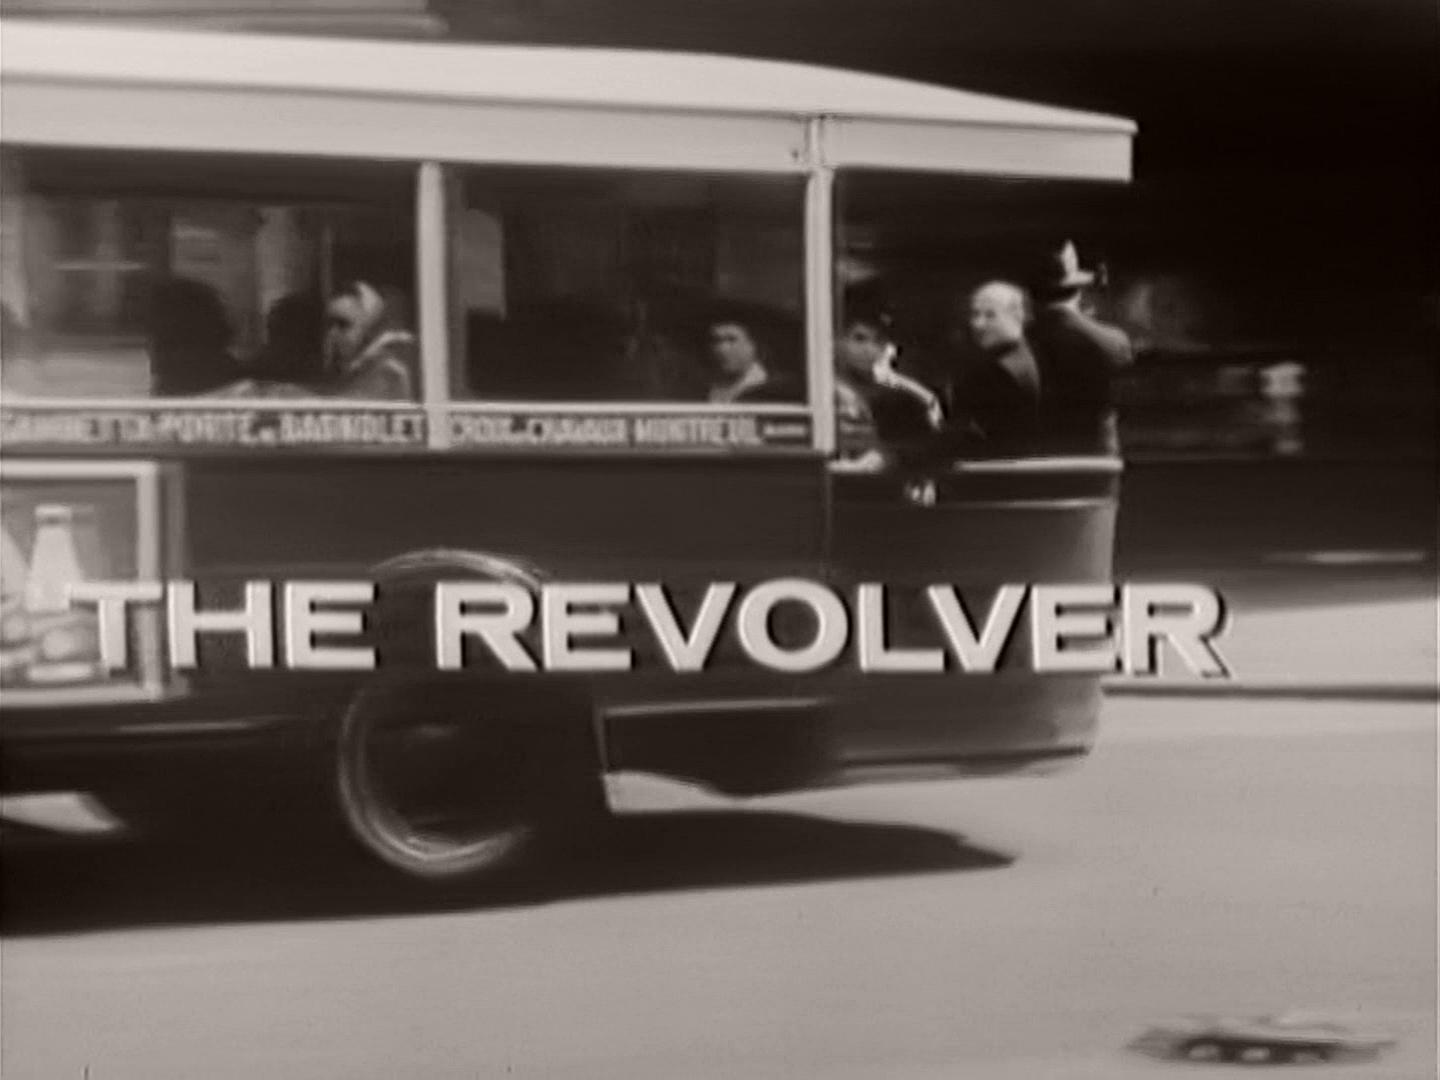 Main title from the 1960 ‘The Revolver’ episode of Maigret (1960-63) (1)